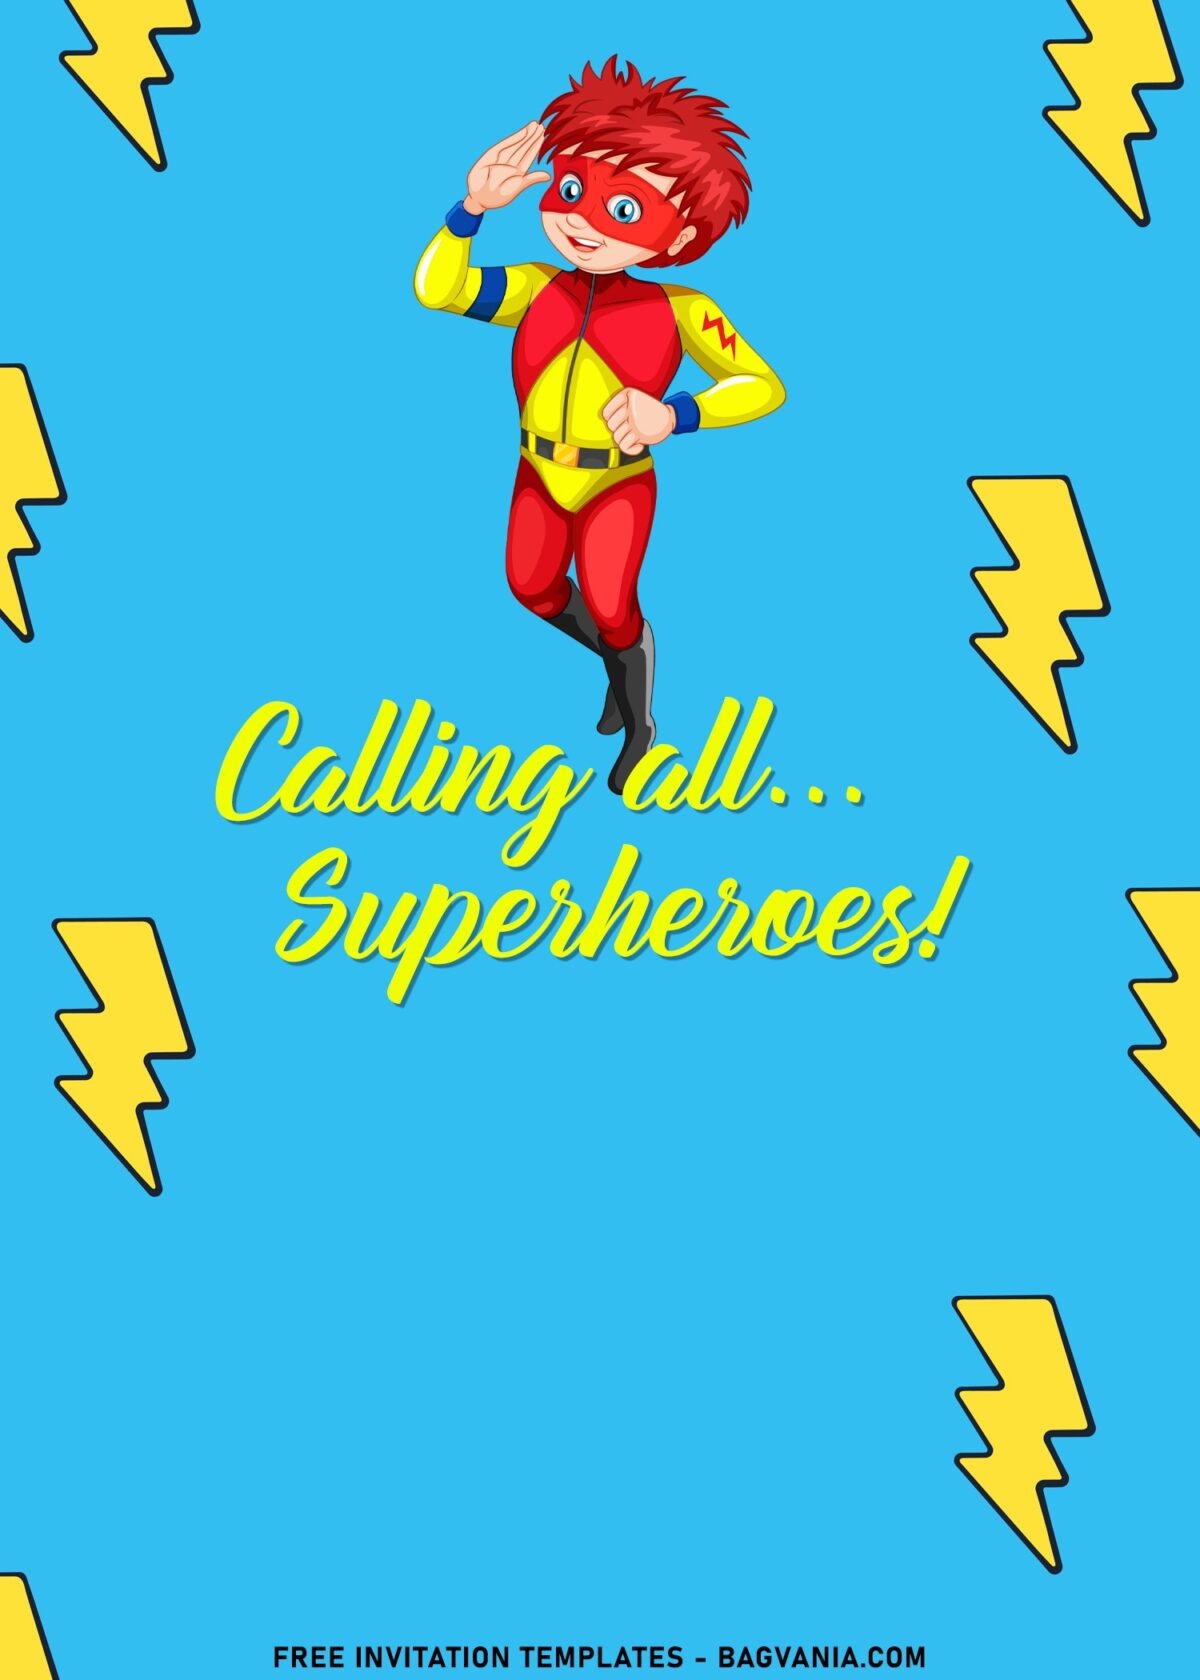 7+ Boys Superhero Birthday Invitation Templates For Your Son's Birthday with bright baby blue colored background and cute yellow lightning bolts